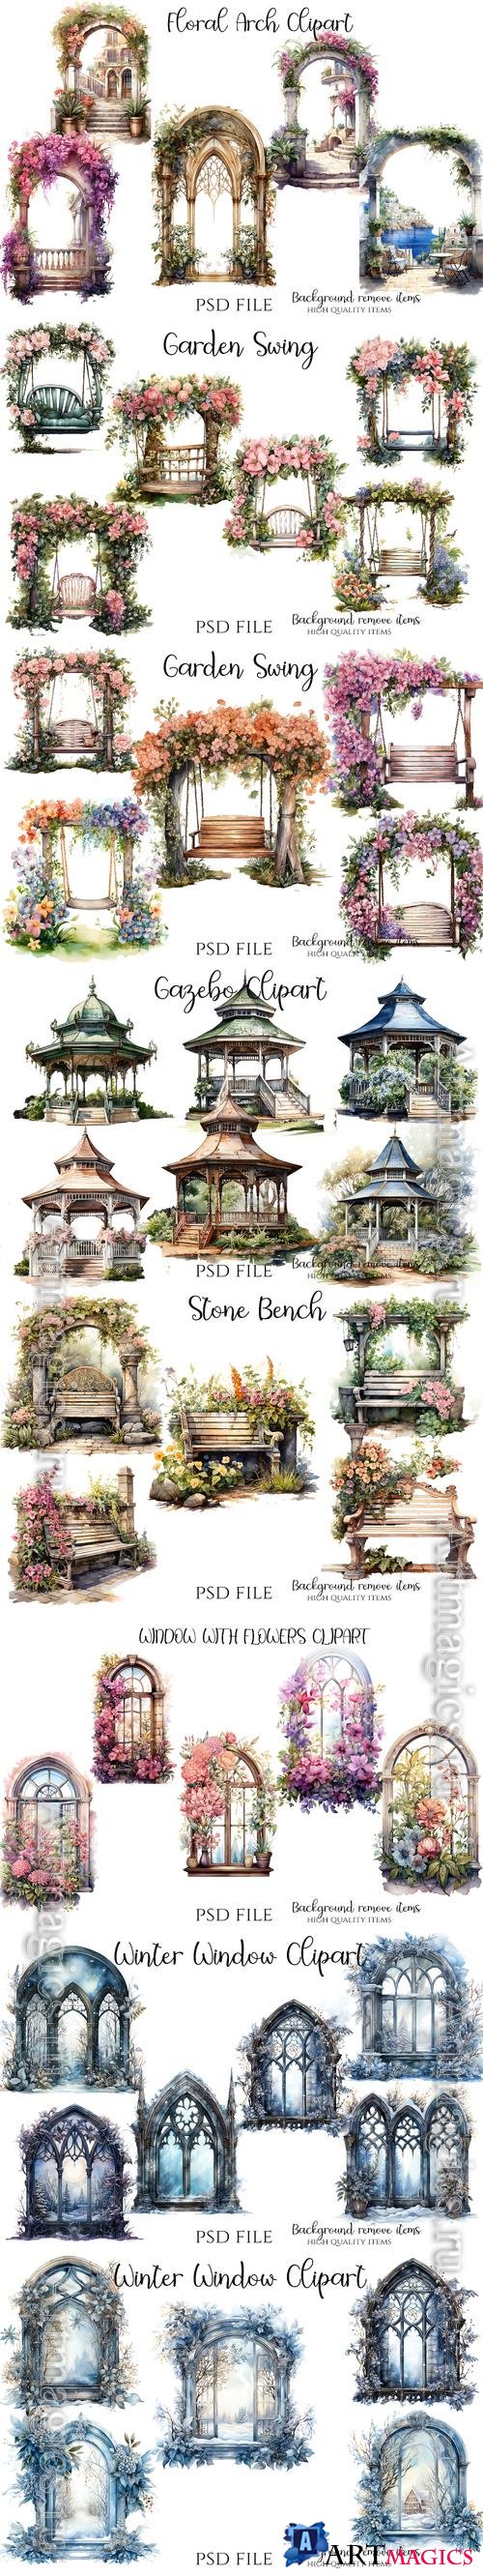 Fairytale house, garden, swing, fountain, arches and gazebos with flowers, window with flowers - PSD illustration cliparts set